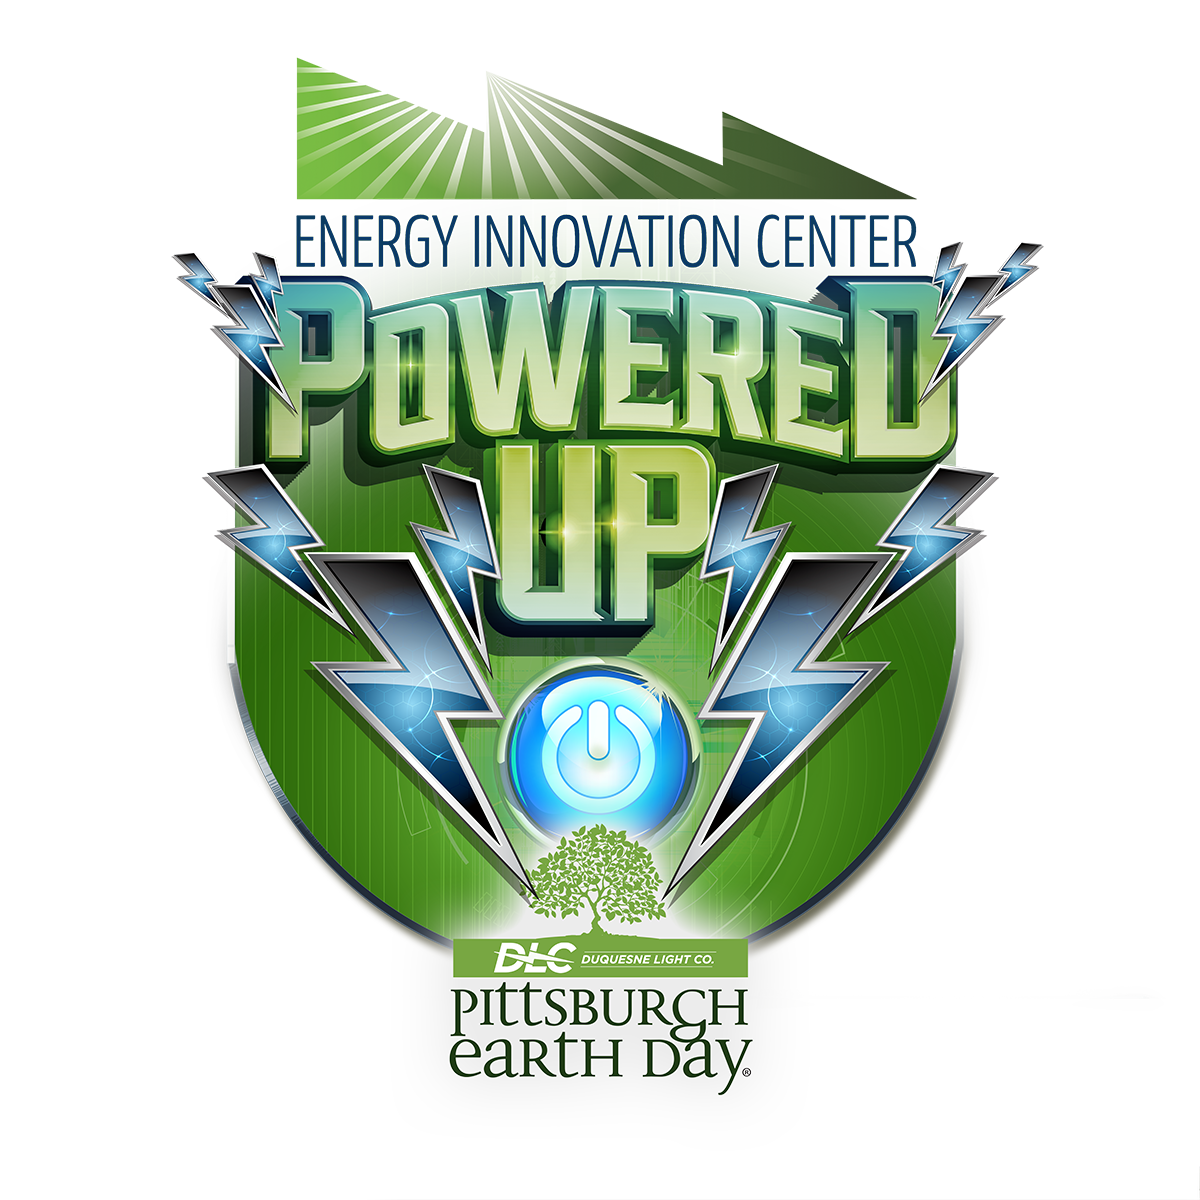 Energy Innovation Center "Powered Up" event, hosted by Pittsburgh Earth Day